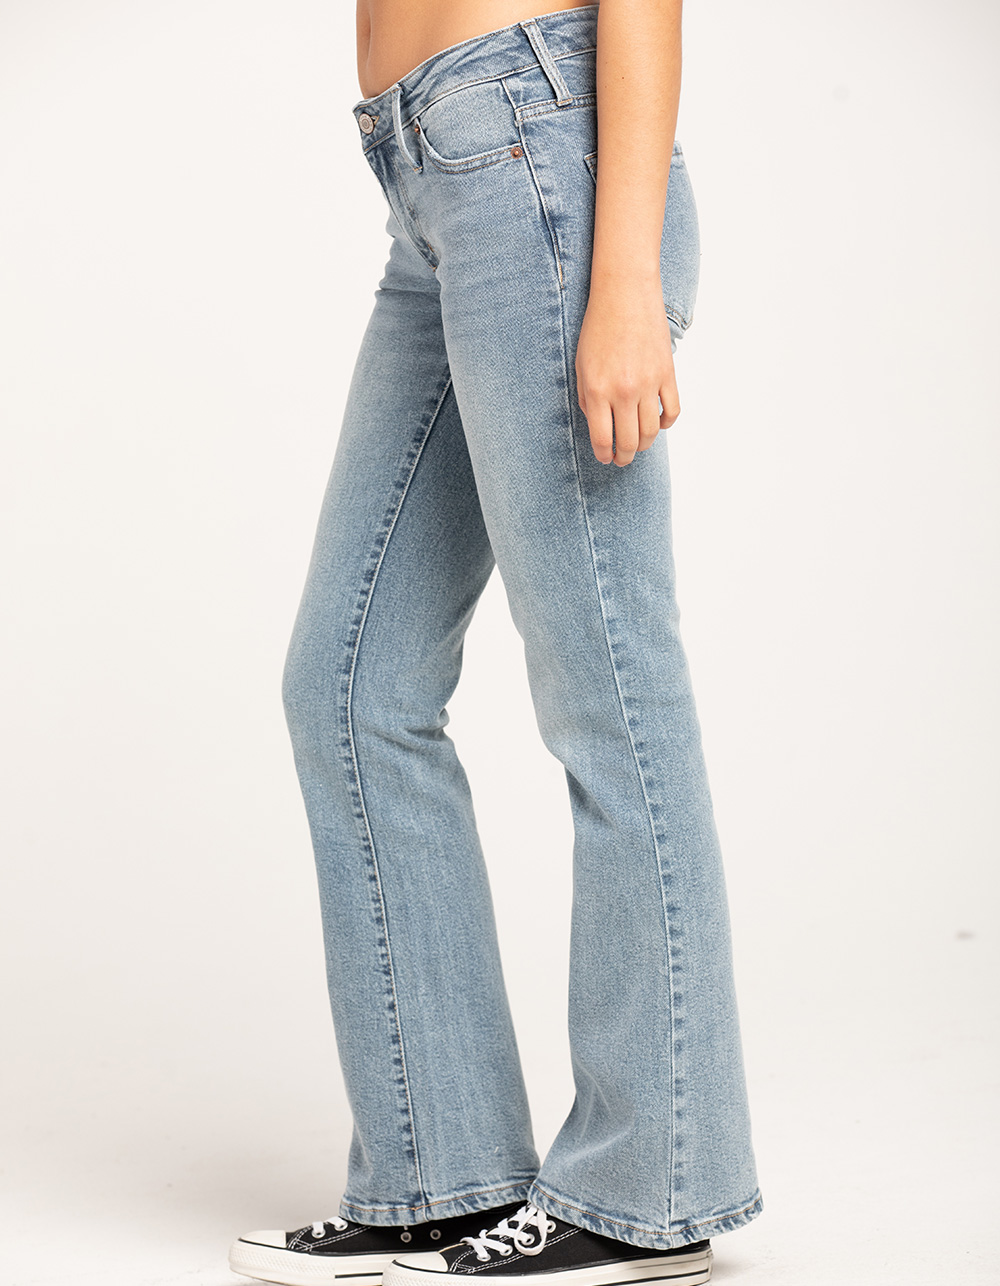 RSQ Girls Low Rise Flare Jeans - LIGHT WASH